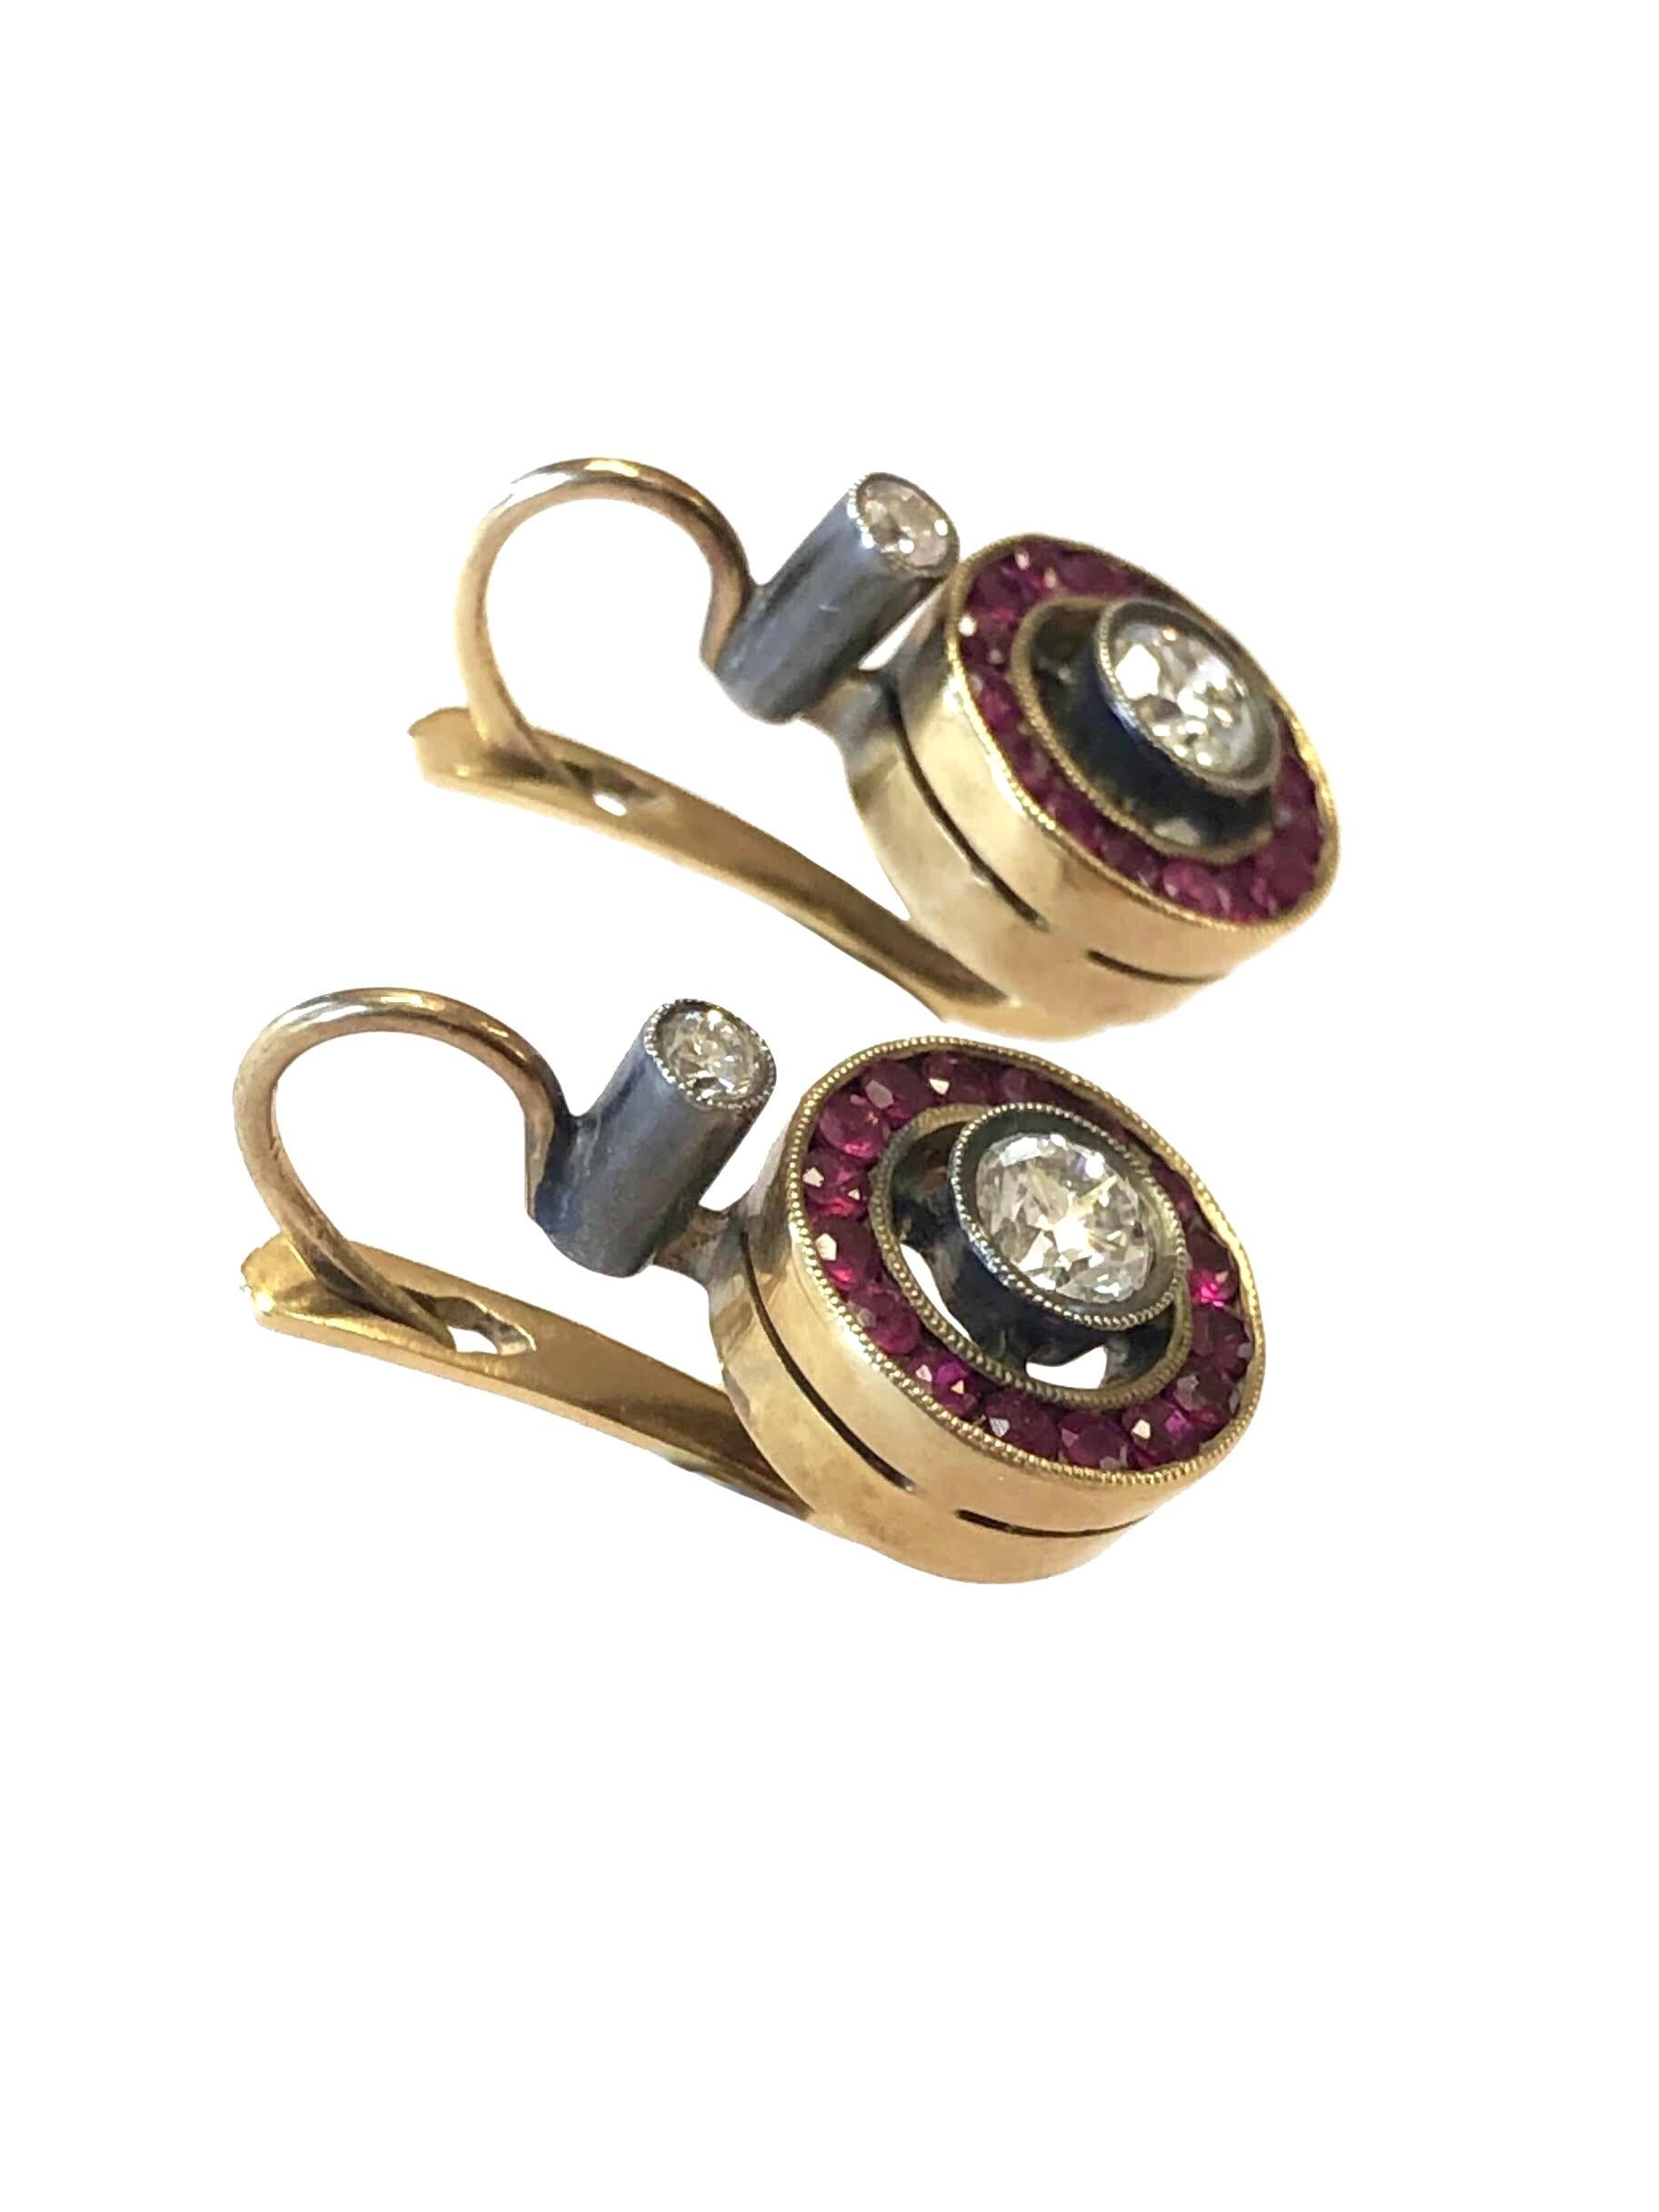 Circa 1915 - 1920 Yellow Gold with Silver Earrings, Measuring just under 1 inch in length and 1/2 inch wide, A European cut Diamonds set in a milgrain Bezel approximately .30 Carat and Surrounded by very Fine color Rubies with another Mine cut